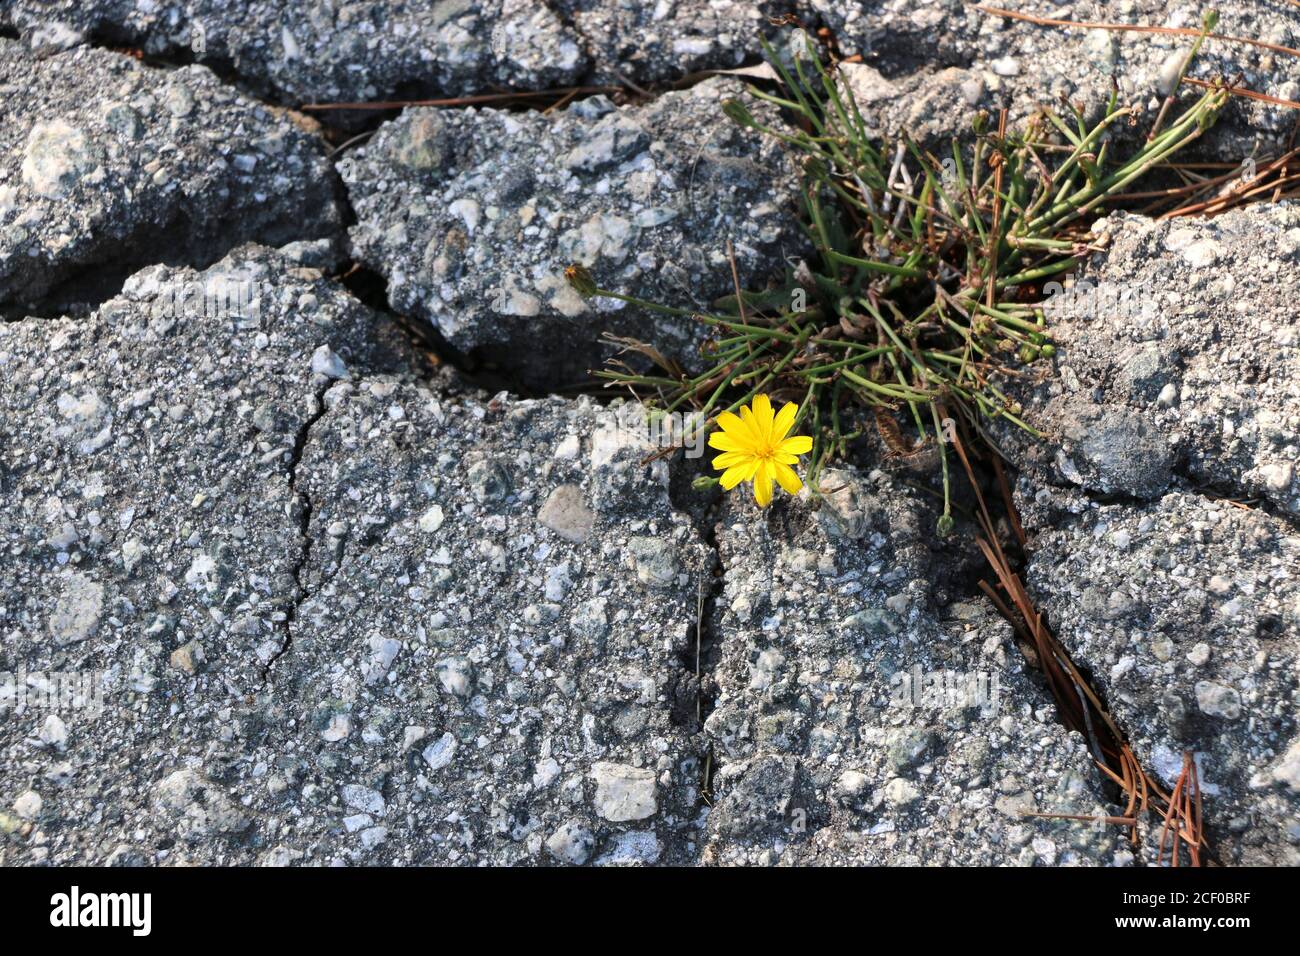 Strong little yellow flower grows up through cracked pavement, a symbol of hope through adversity. Stock Photo